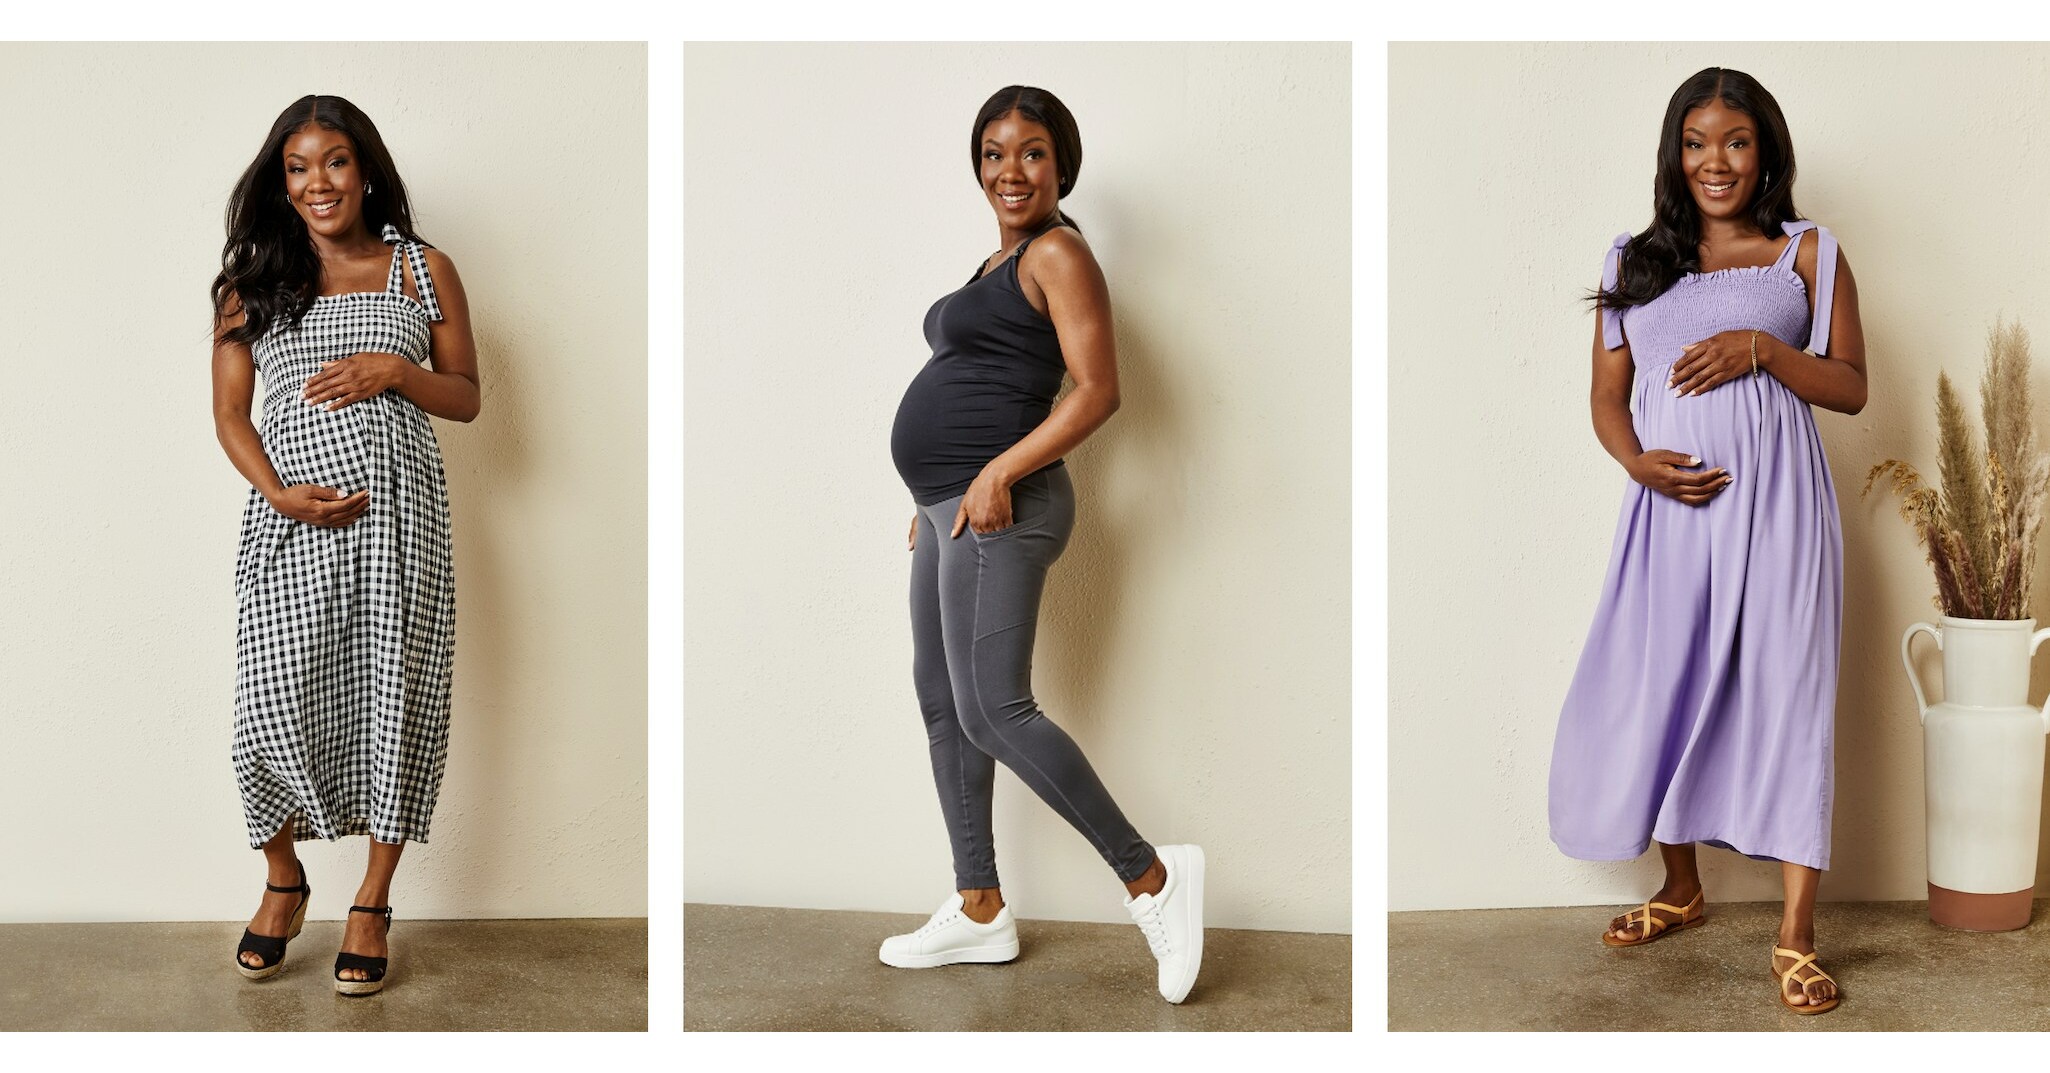 Don't miss out on this amazing offer ‼ Grab these any 𝟐 𝐬𝐞𝐥𝐞𝐜𝐭𝐞𝐝  𝐬𝐭𝐲𝐥𝐞𝐬 at 𝟒𝟎% 𝐨𝐟𝐟 now 🛍💥 #maternity #maternitywear  #maternityfashion…